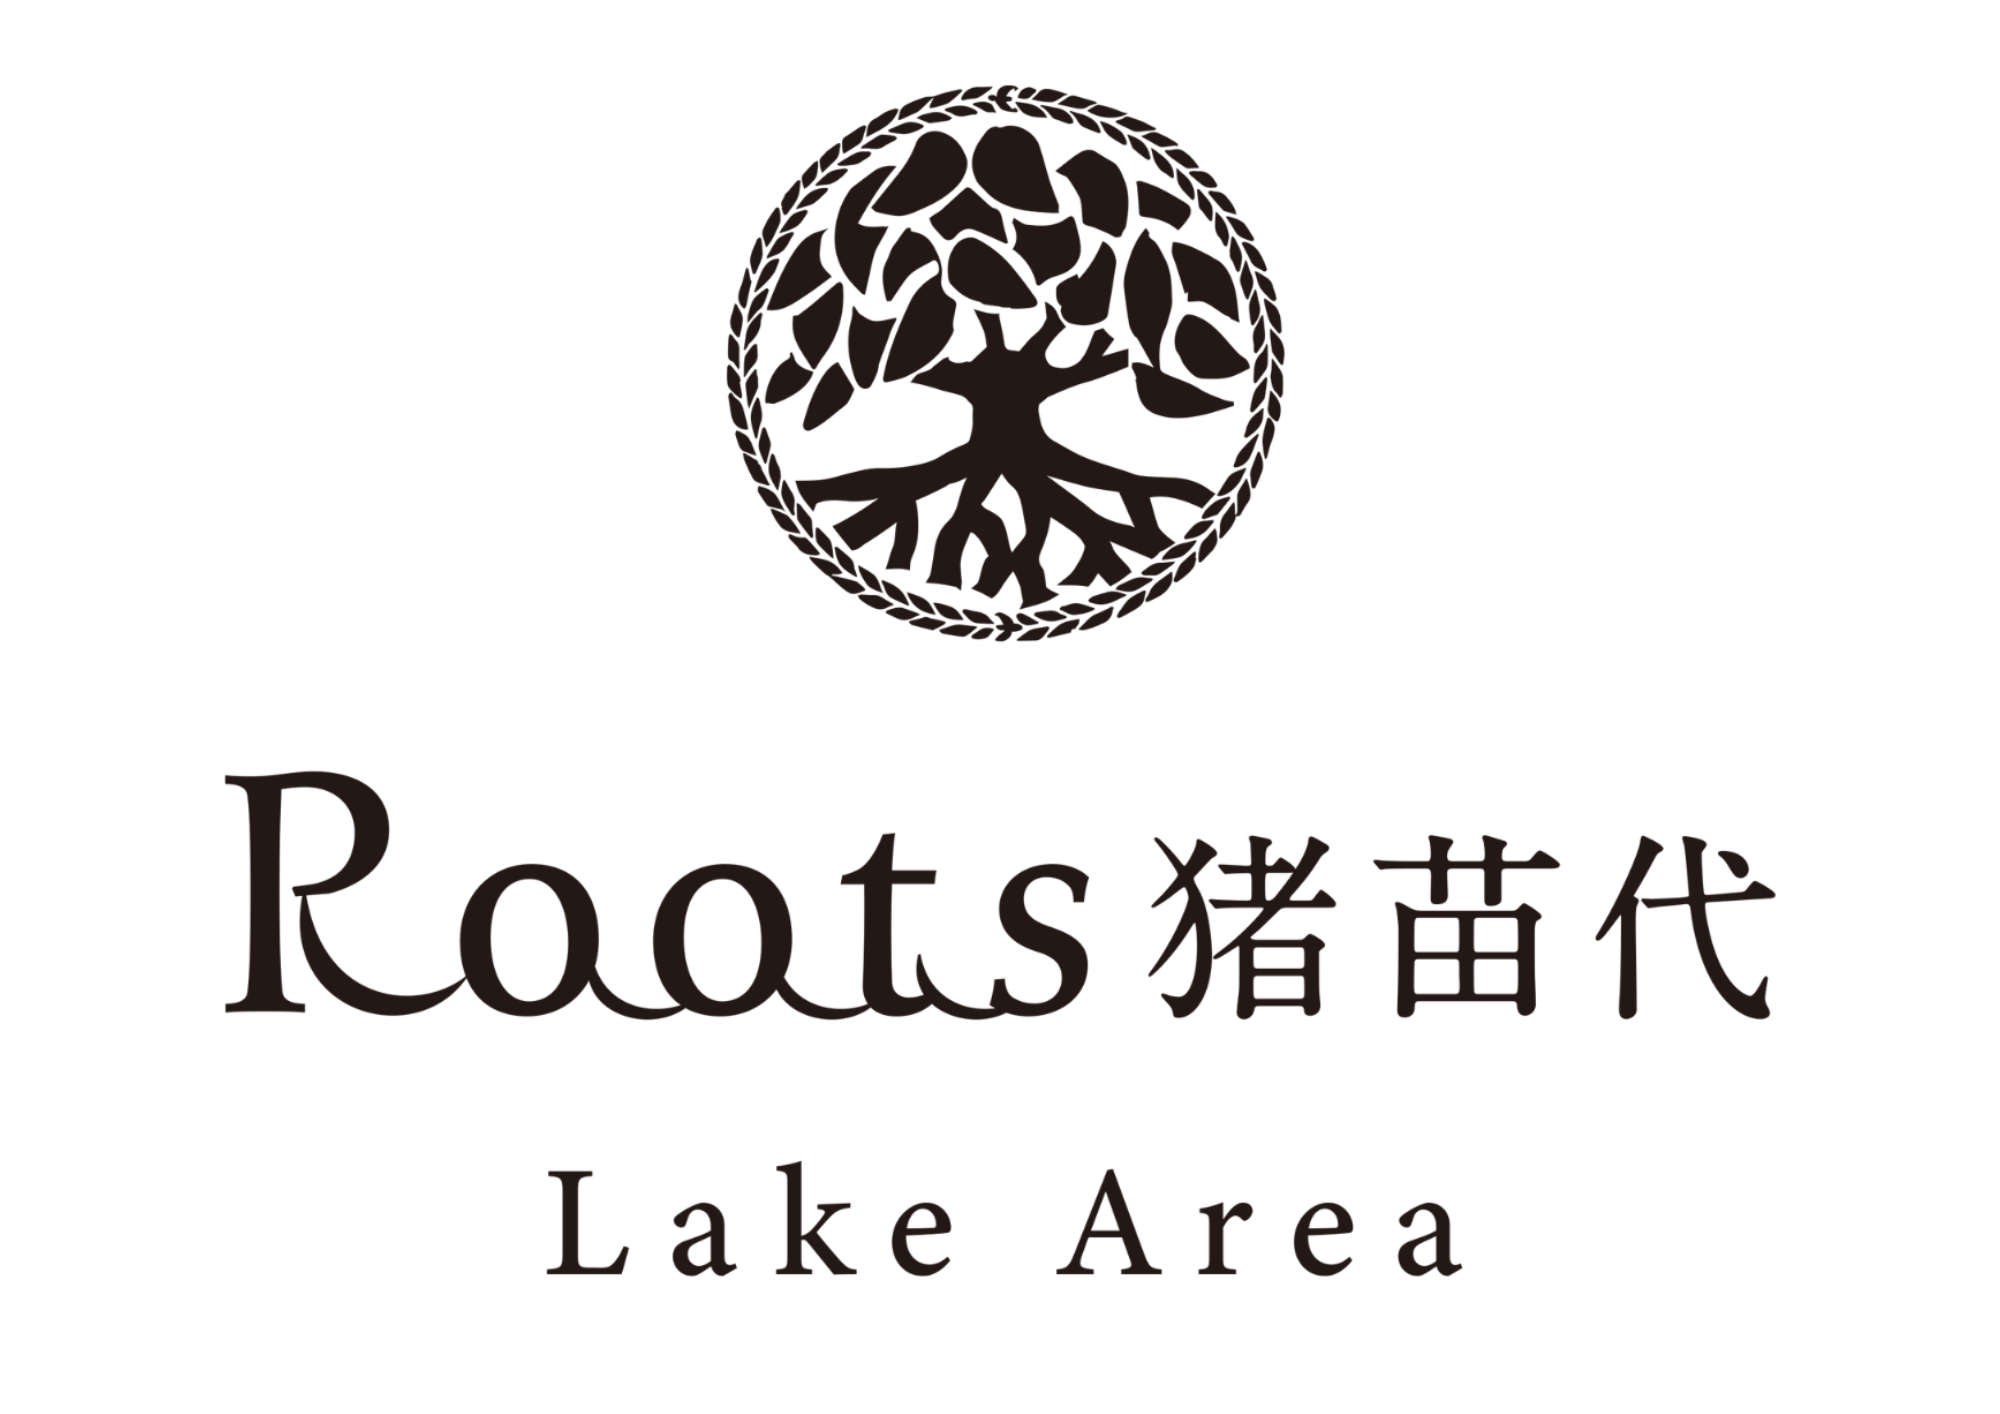 Roots Lake Area